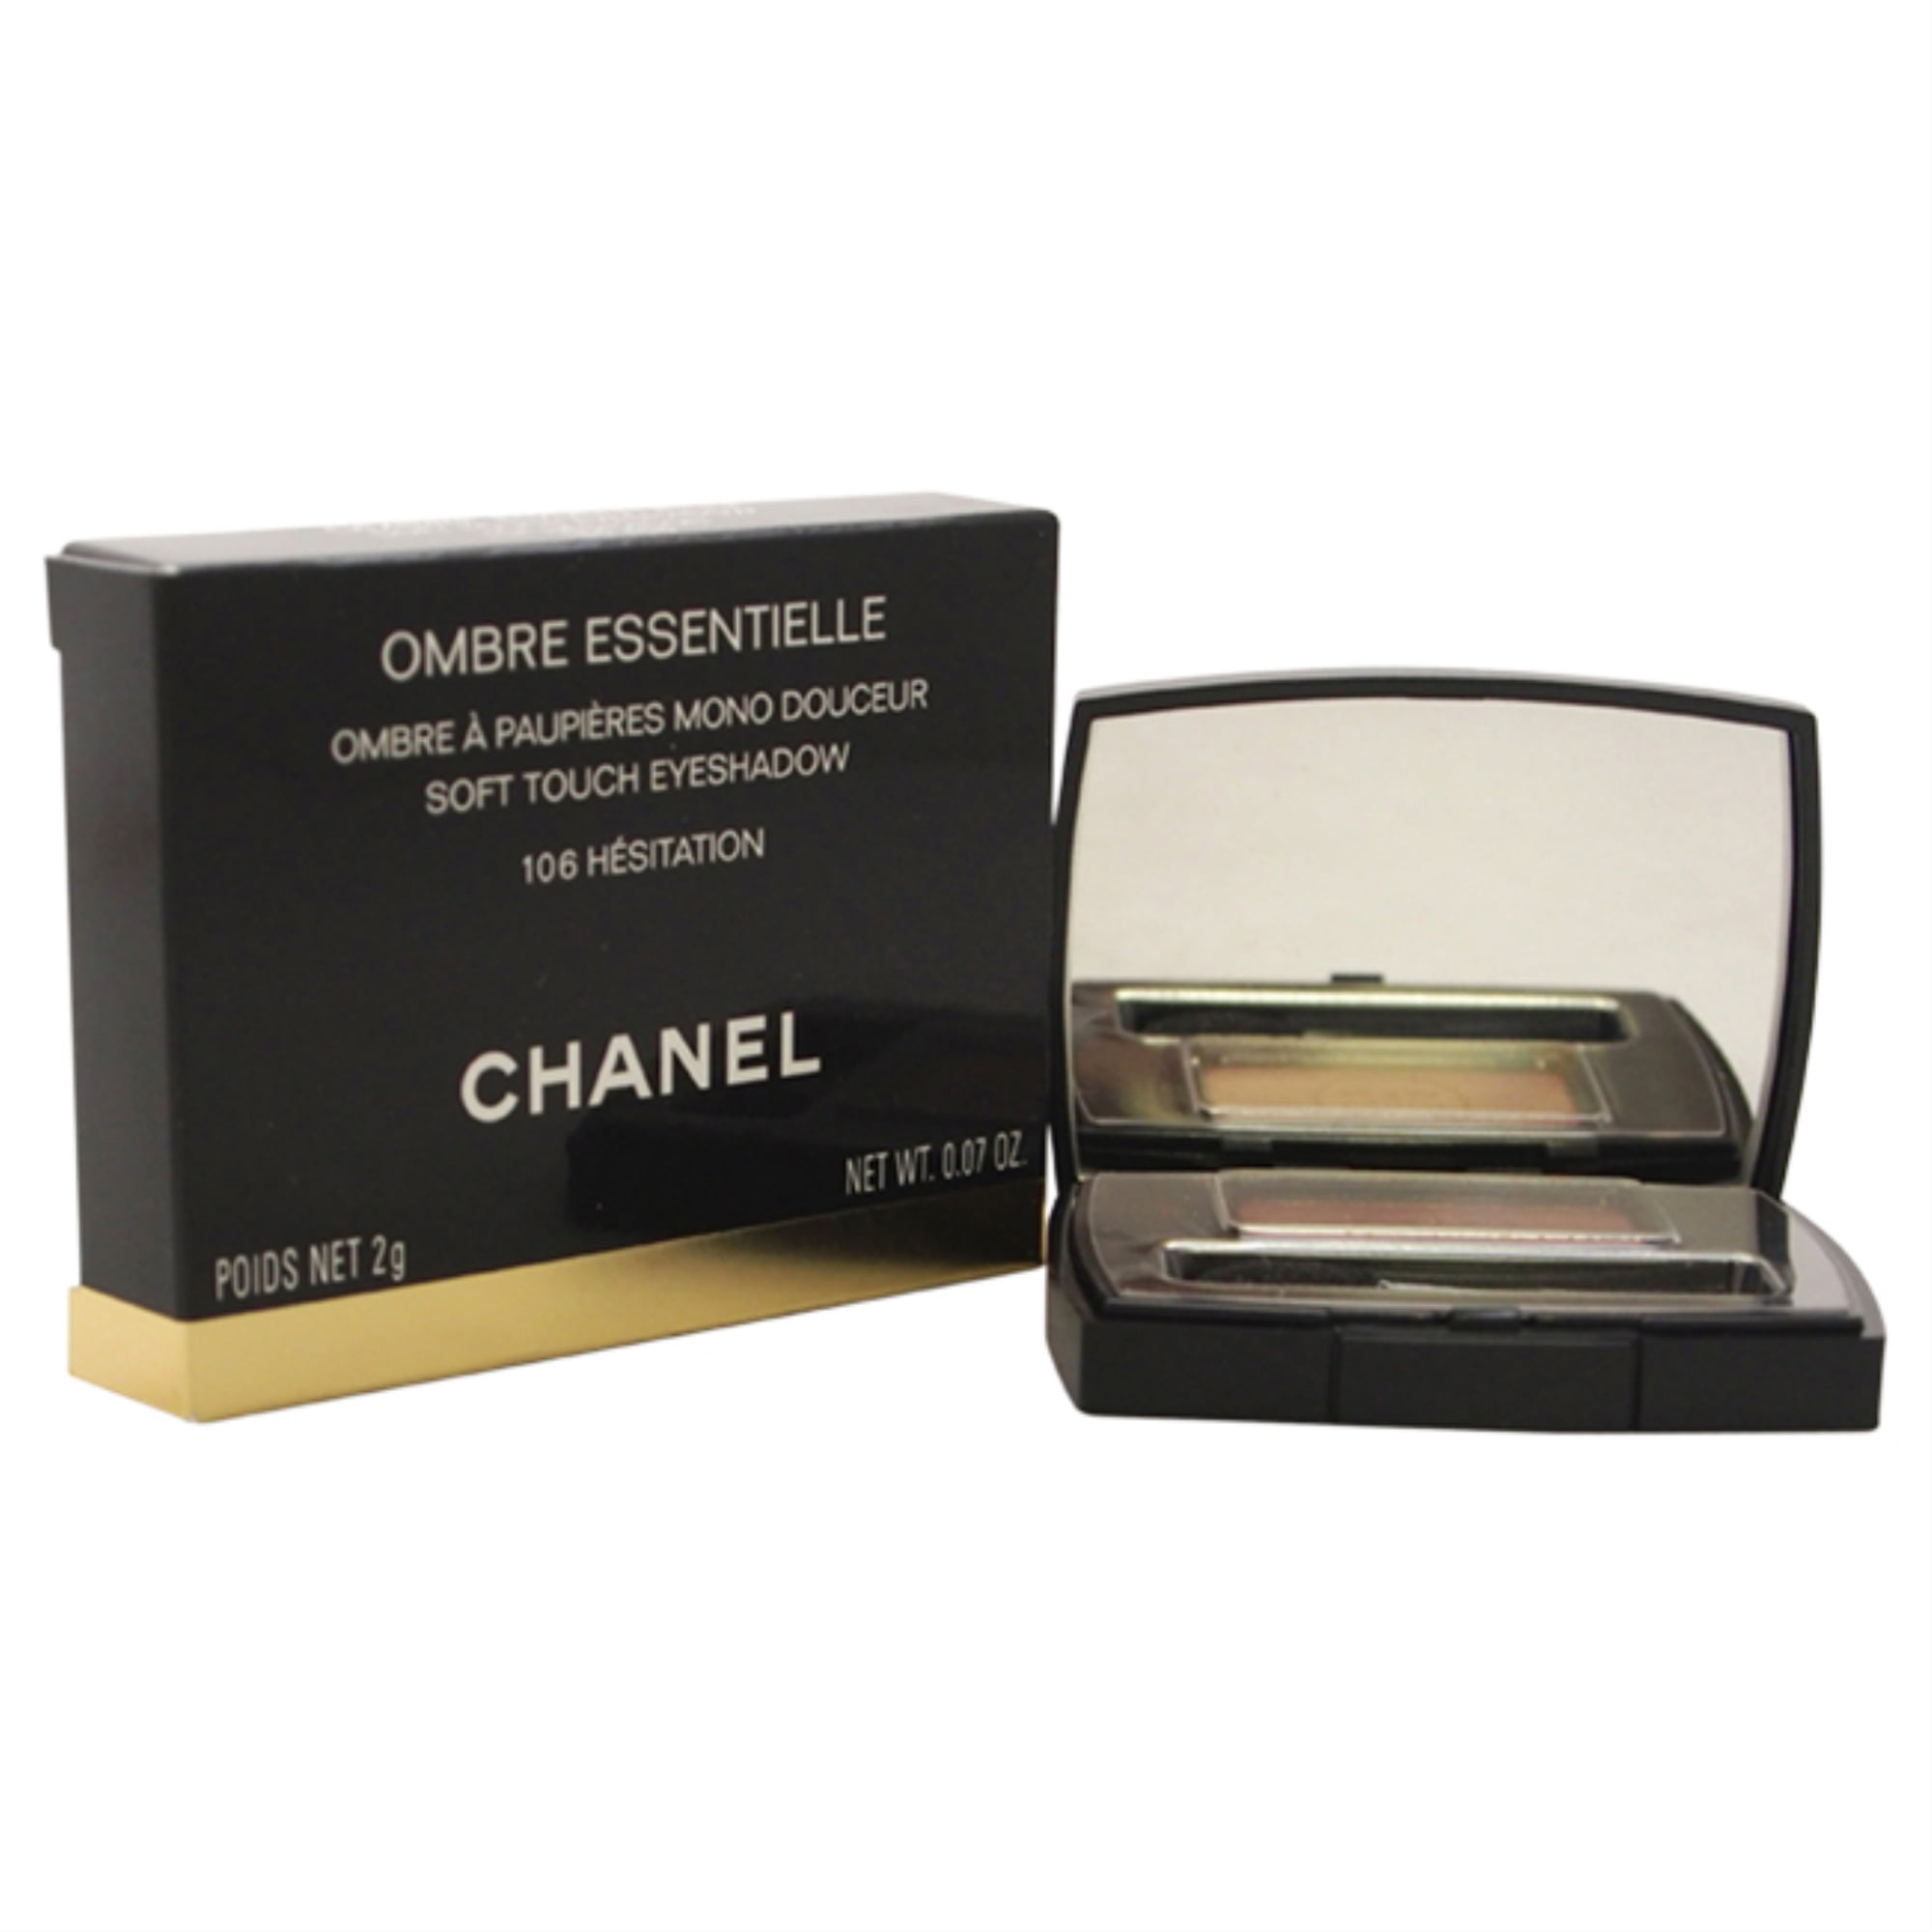 Ombre Essentielle Soft Touch Eyeshadow - # 106 Hesitation by Chanel for  Women - 0.07 oz Eyeshadow